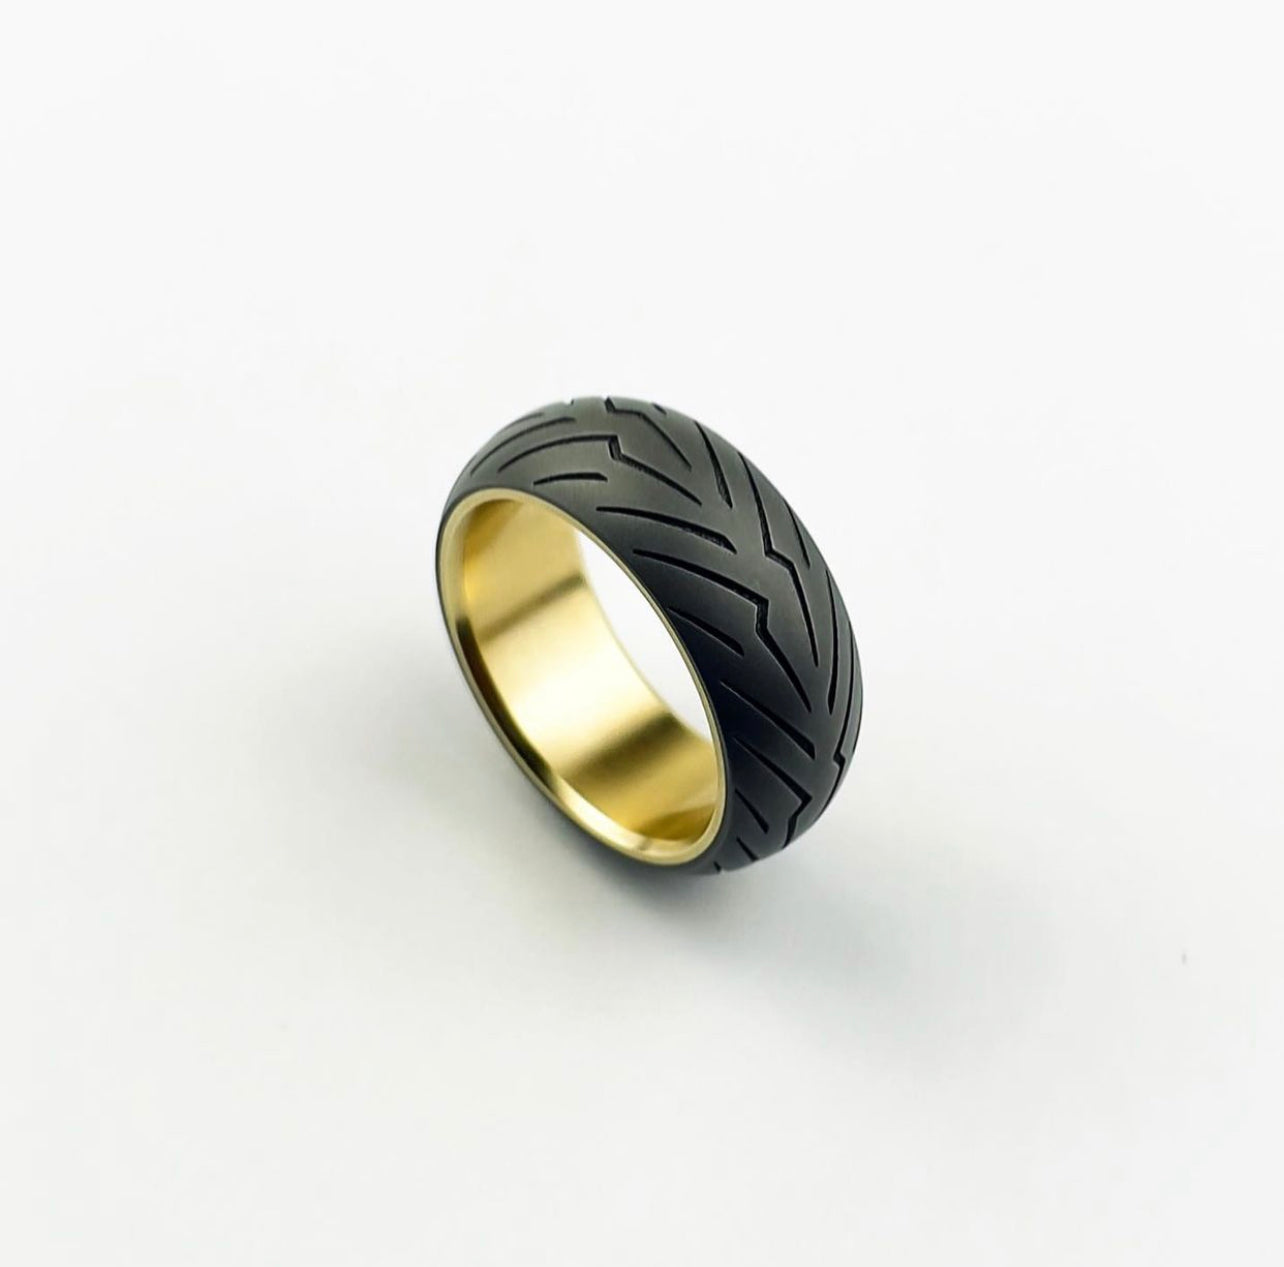 First we did the car tyre and now the bike tyre. Made in black zirconium. # ring #rings #ringsofinstagram #ring #mensring #mensrings #je... | Instagram